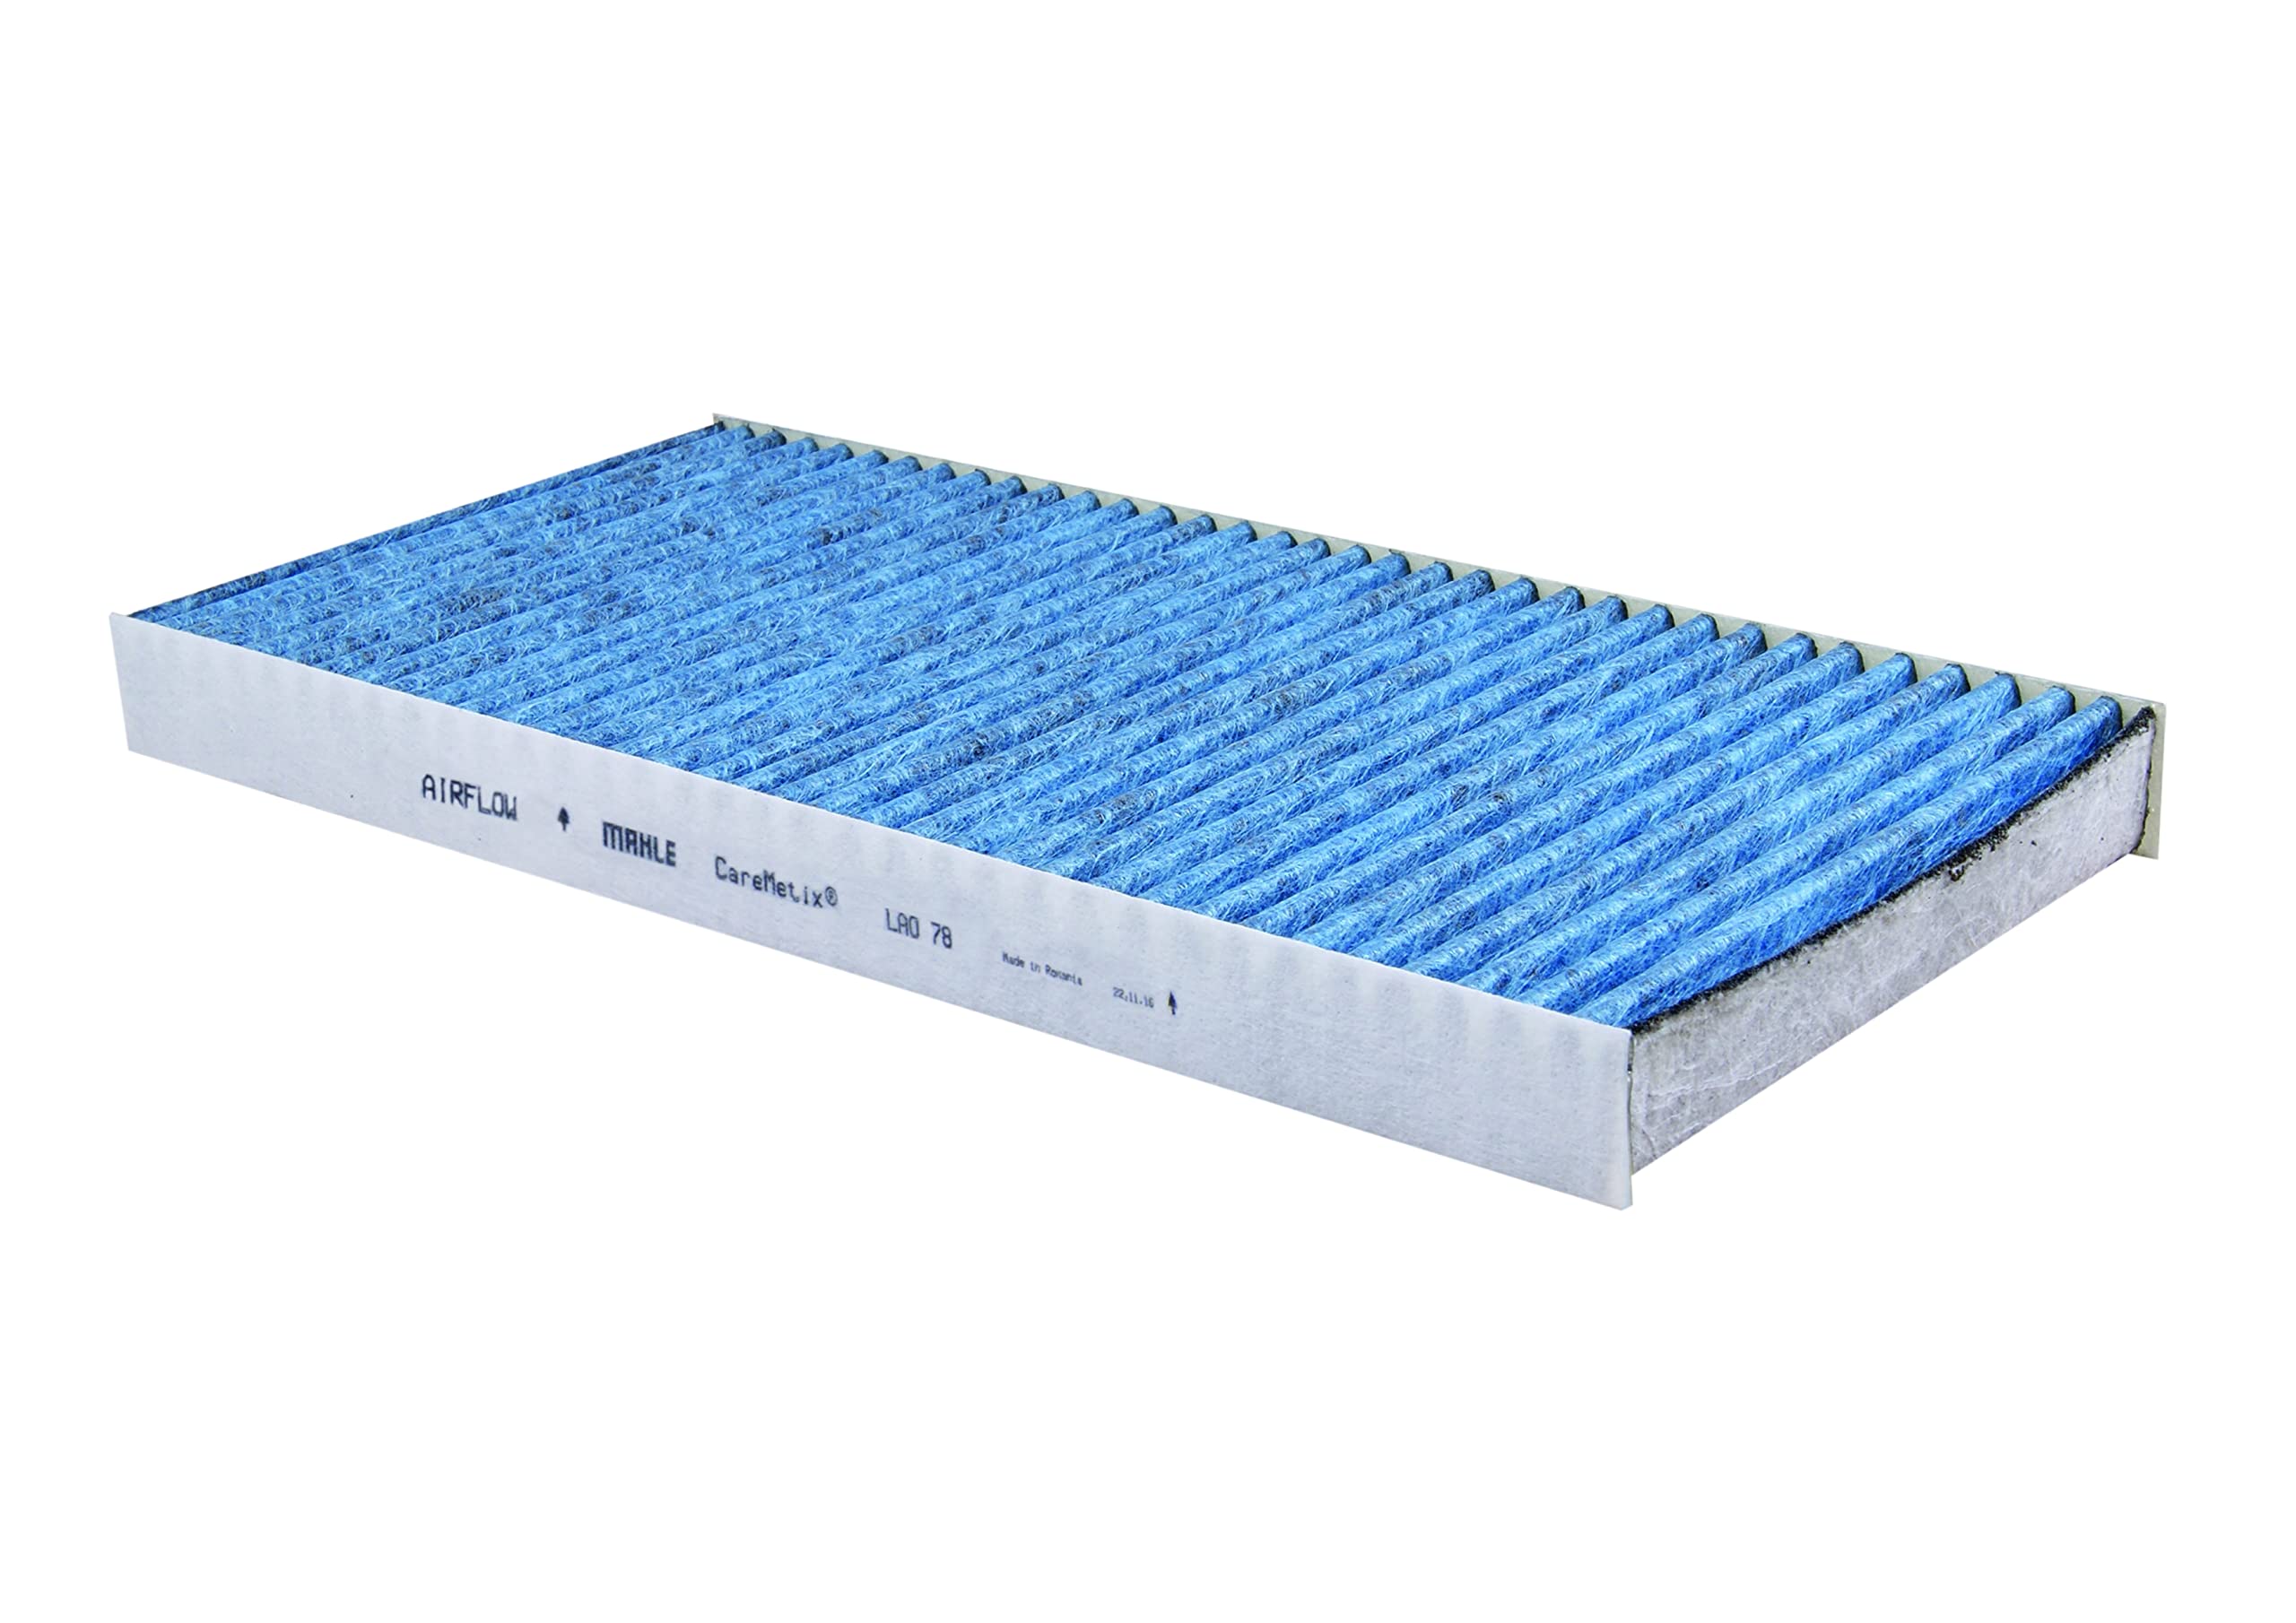 MAHLE Cabin Air Filter LAO 78